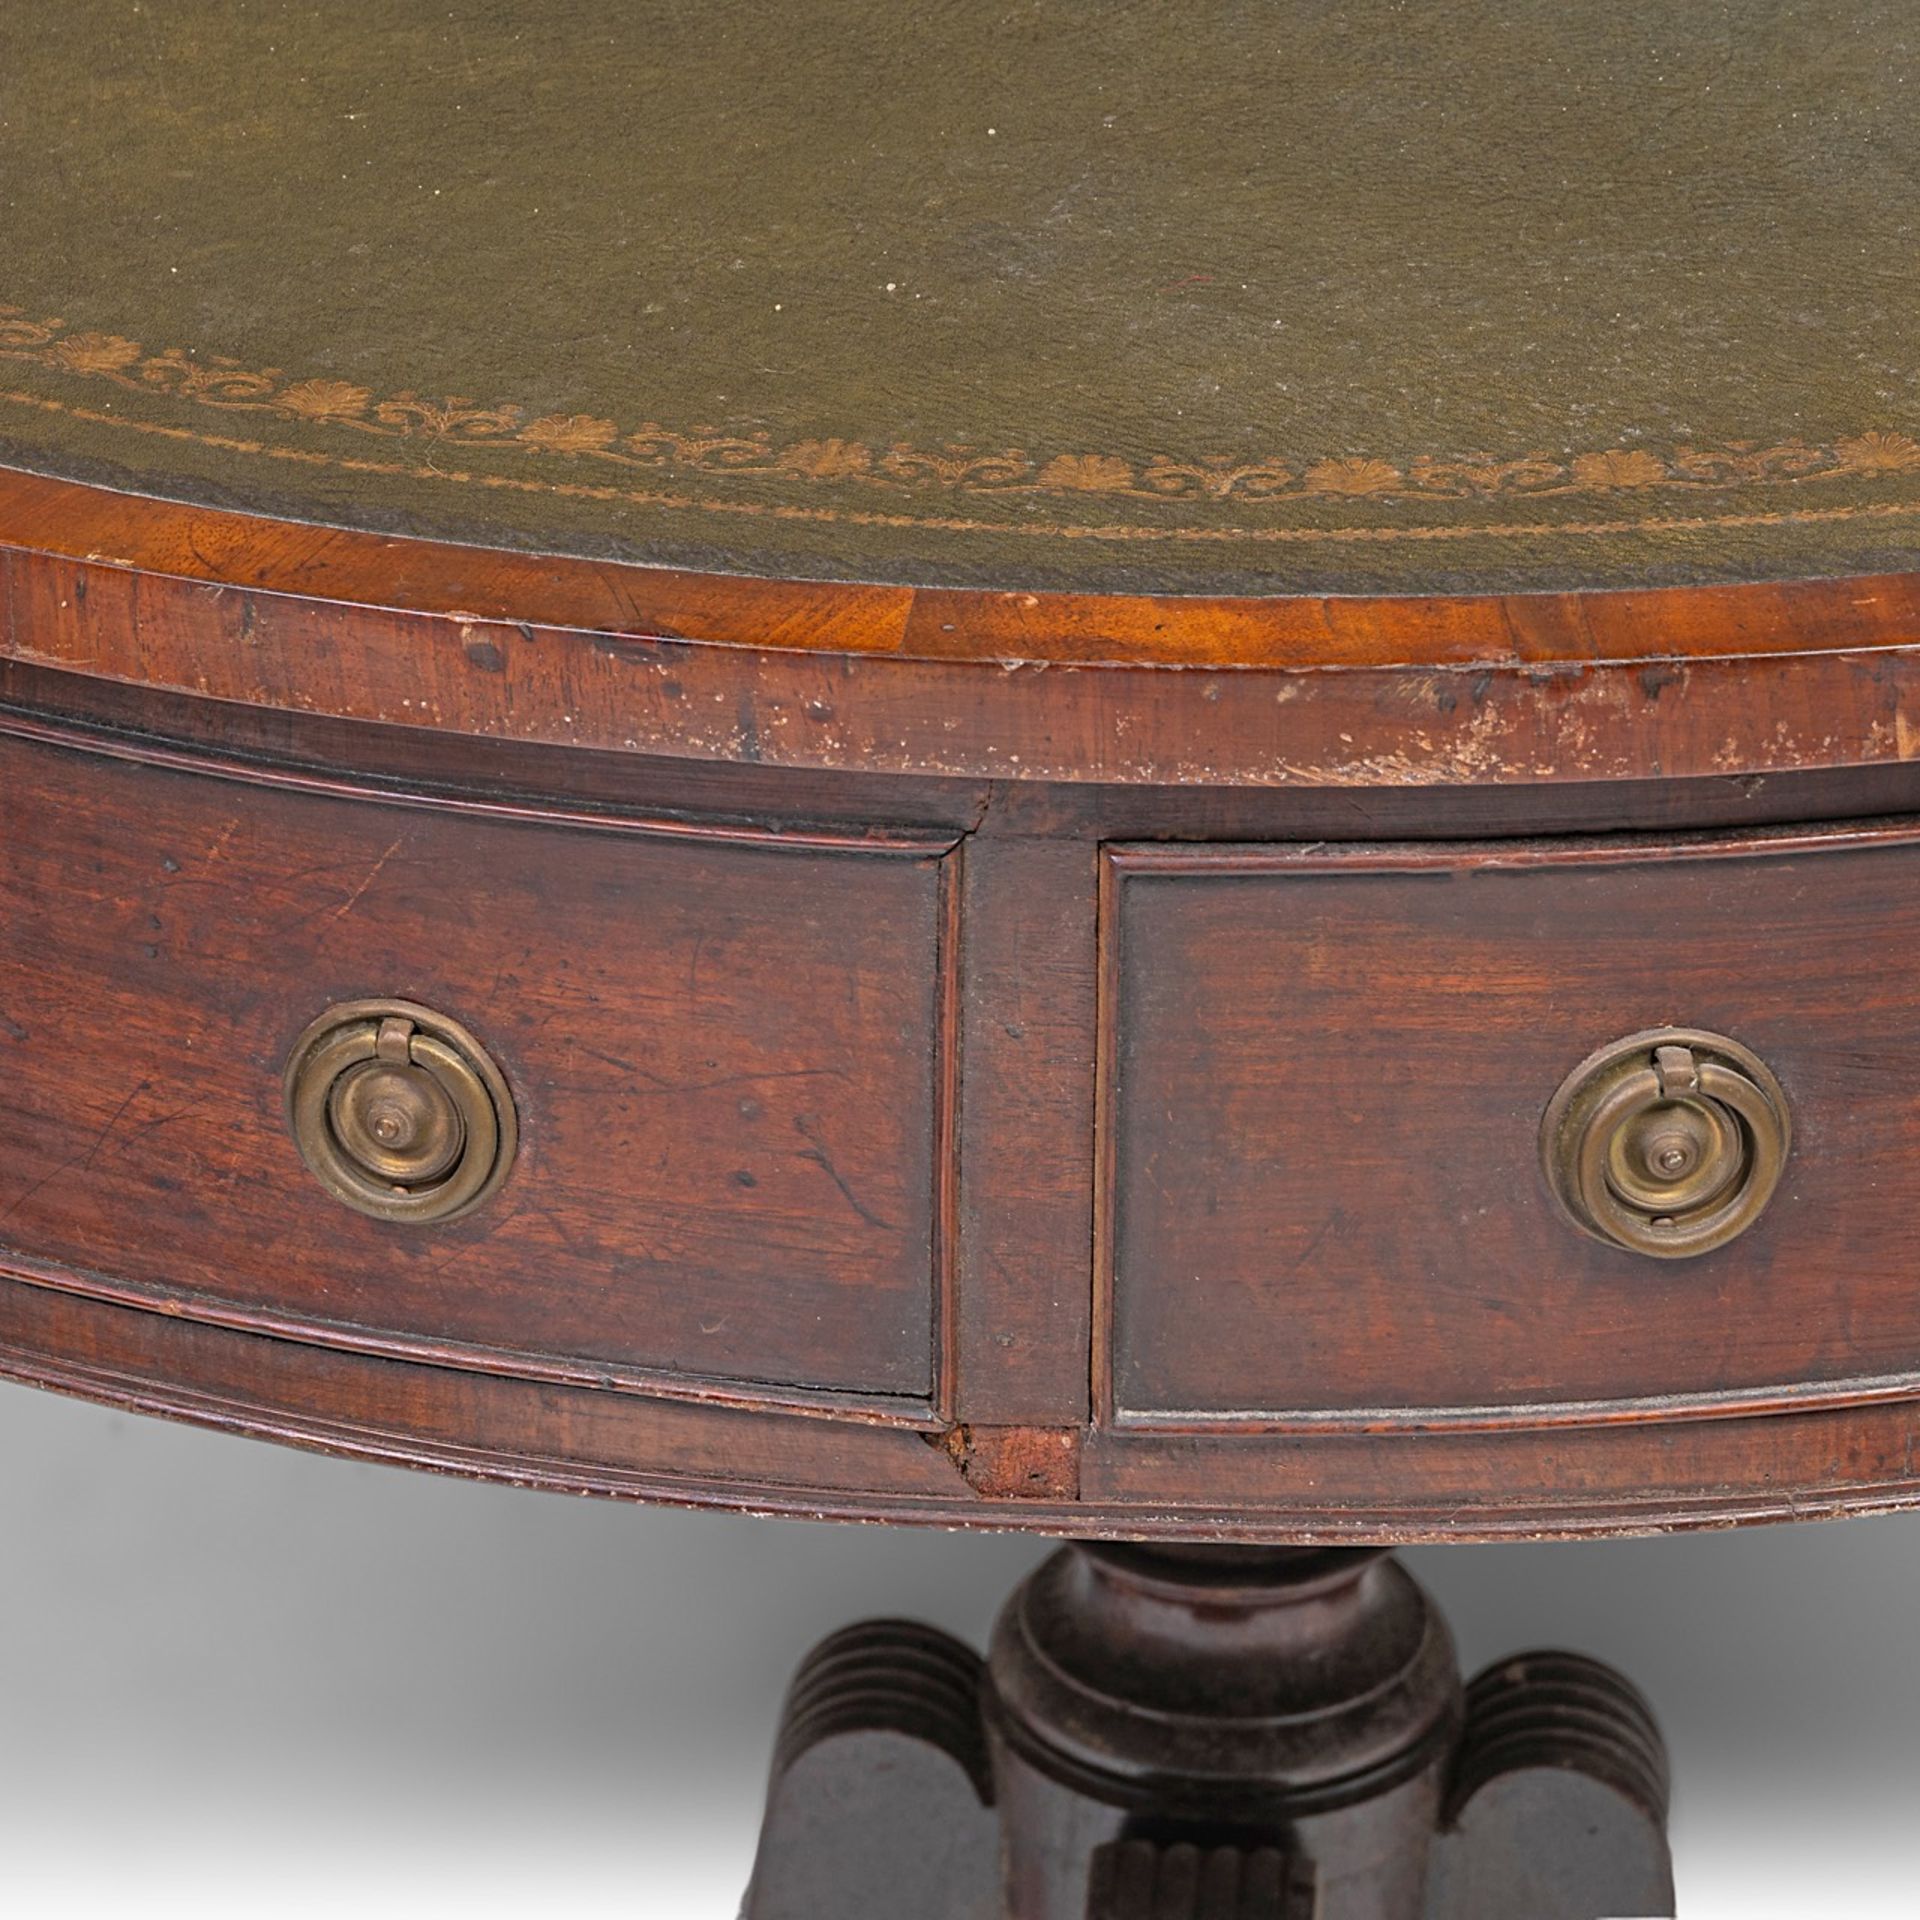 An English revolving drum table, marked with a crowned WR, ca. 1800, H 74 cm - dia 91 cm - Image 8 of 9